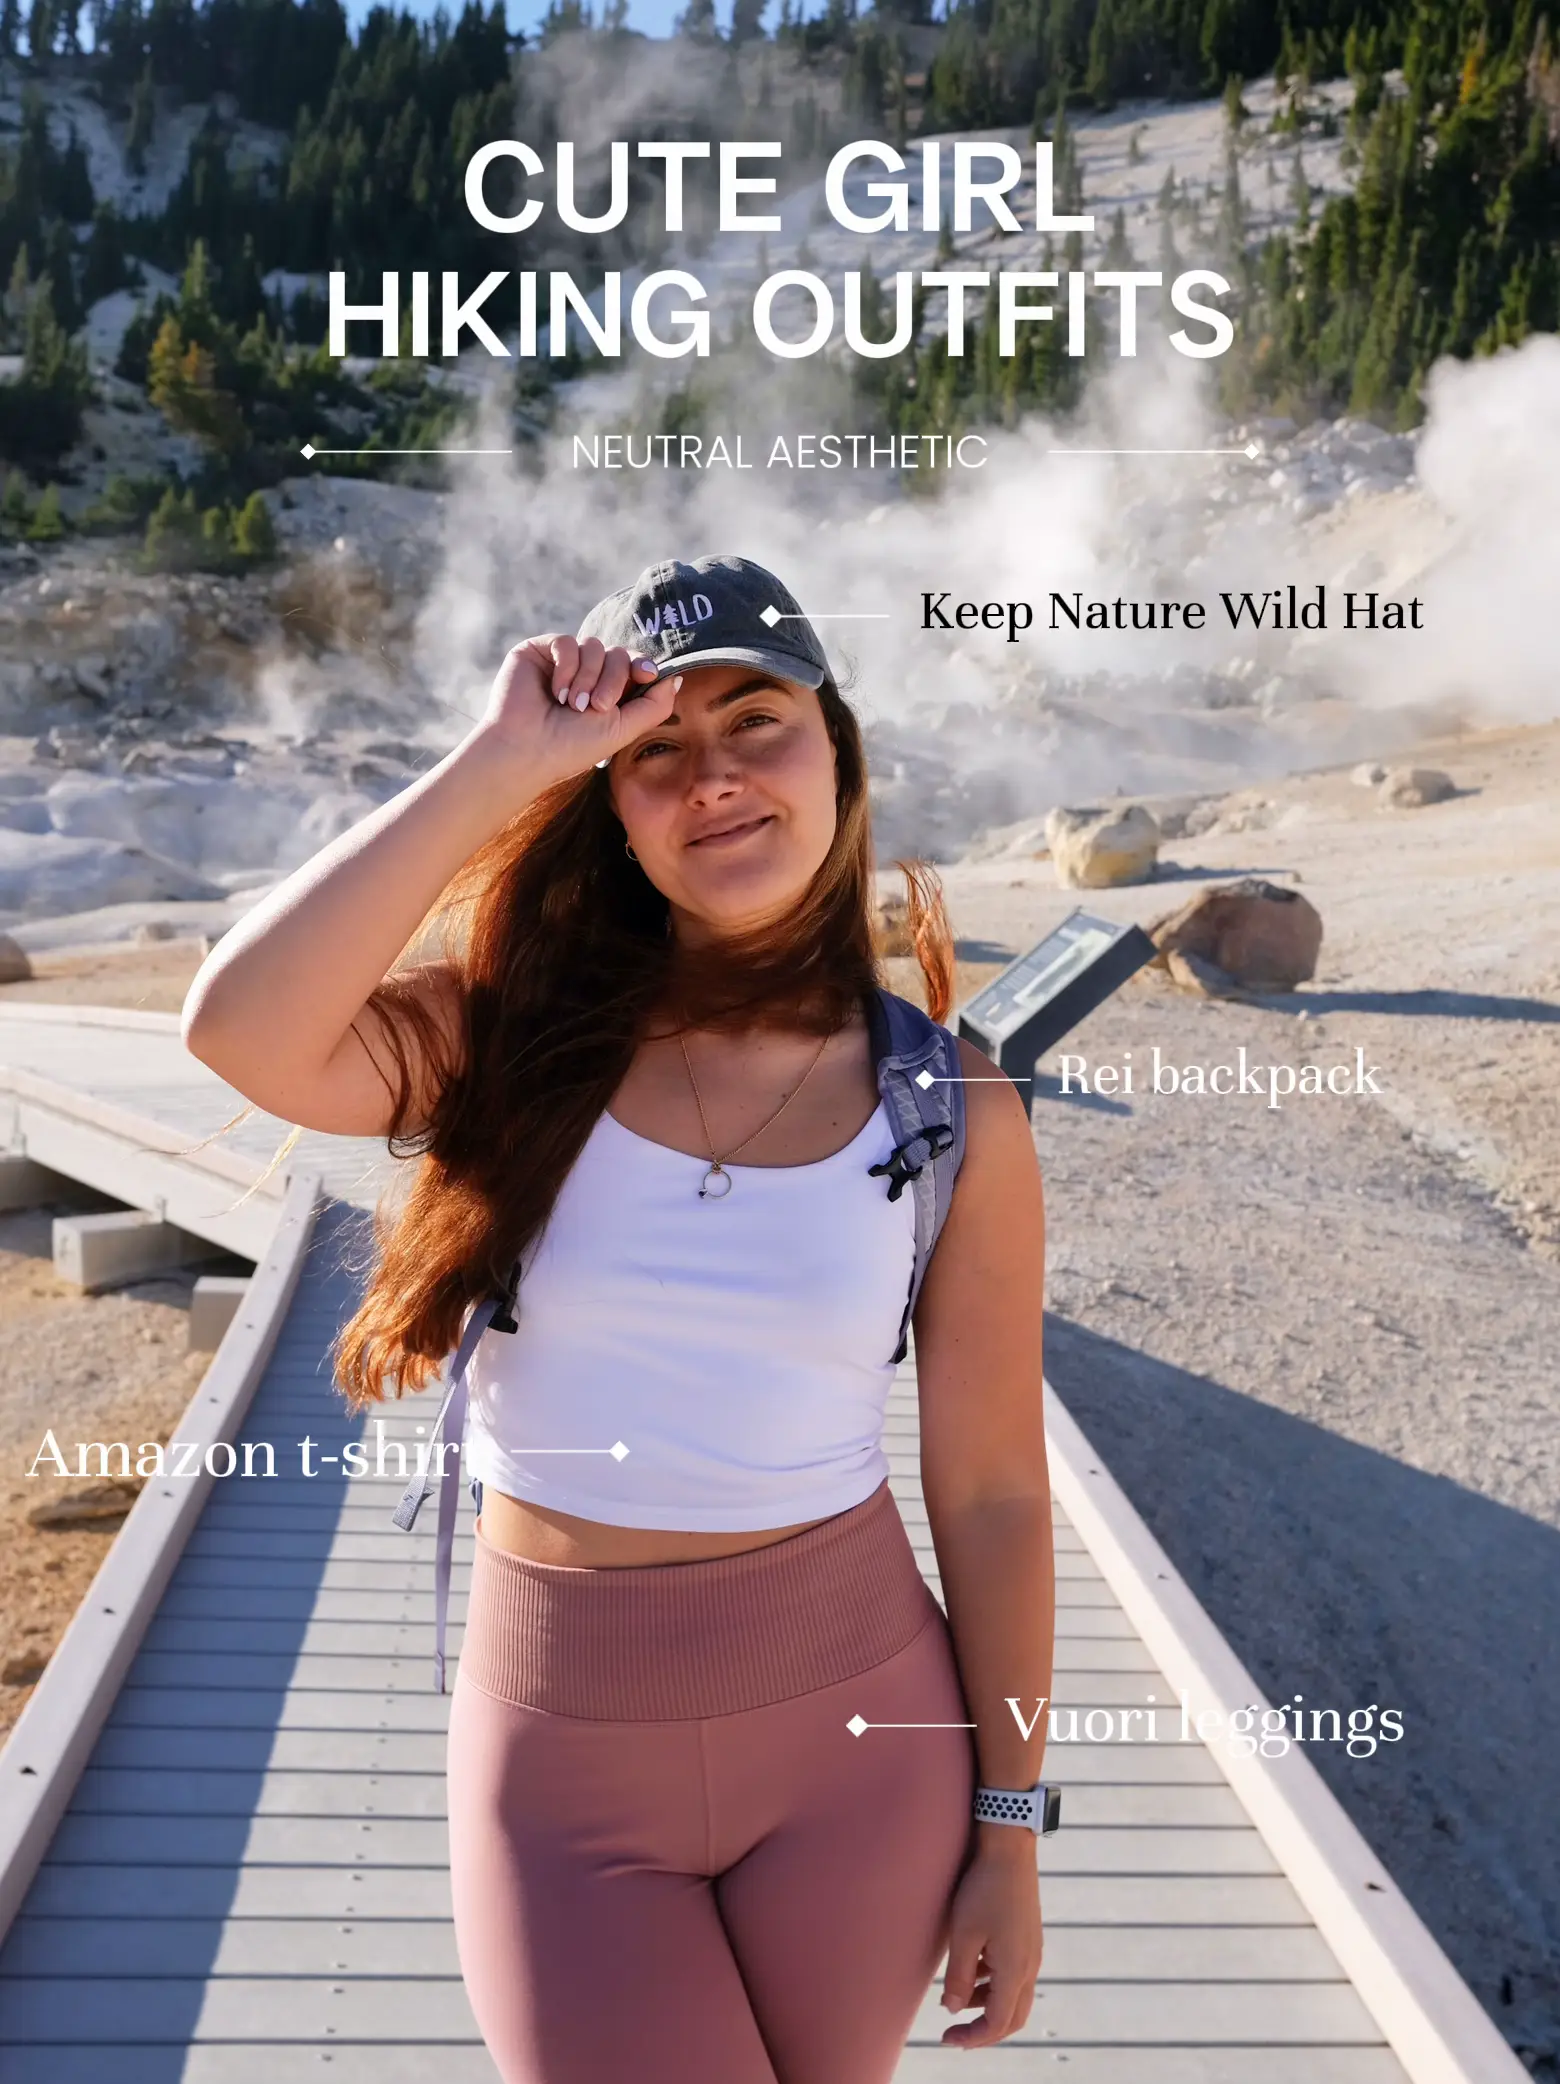 Cute girl hiking outfits, Gallery posted by Anna, SF